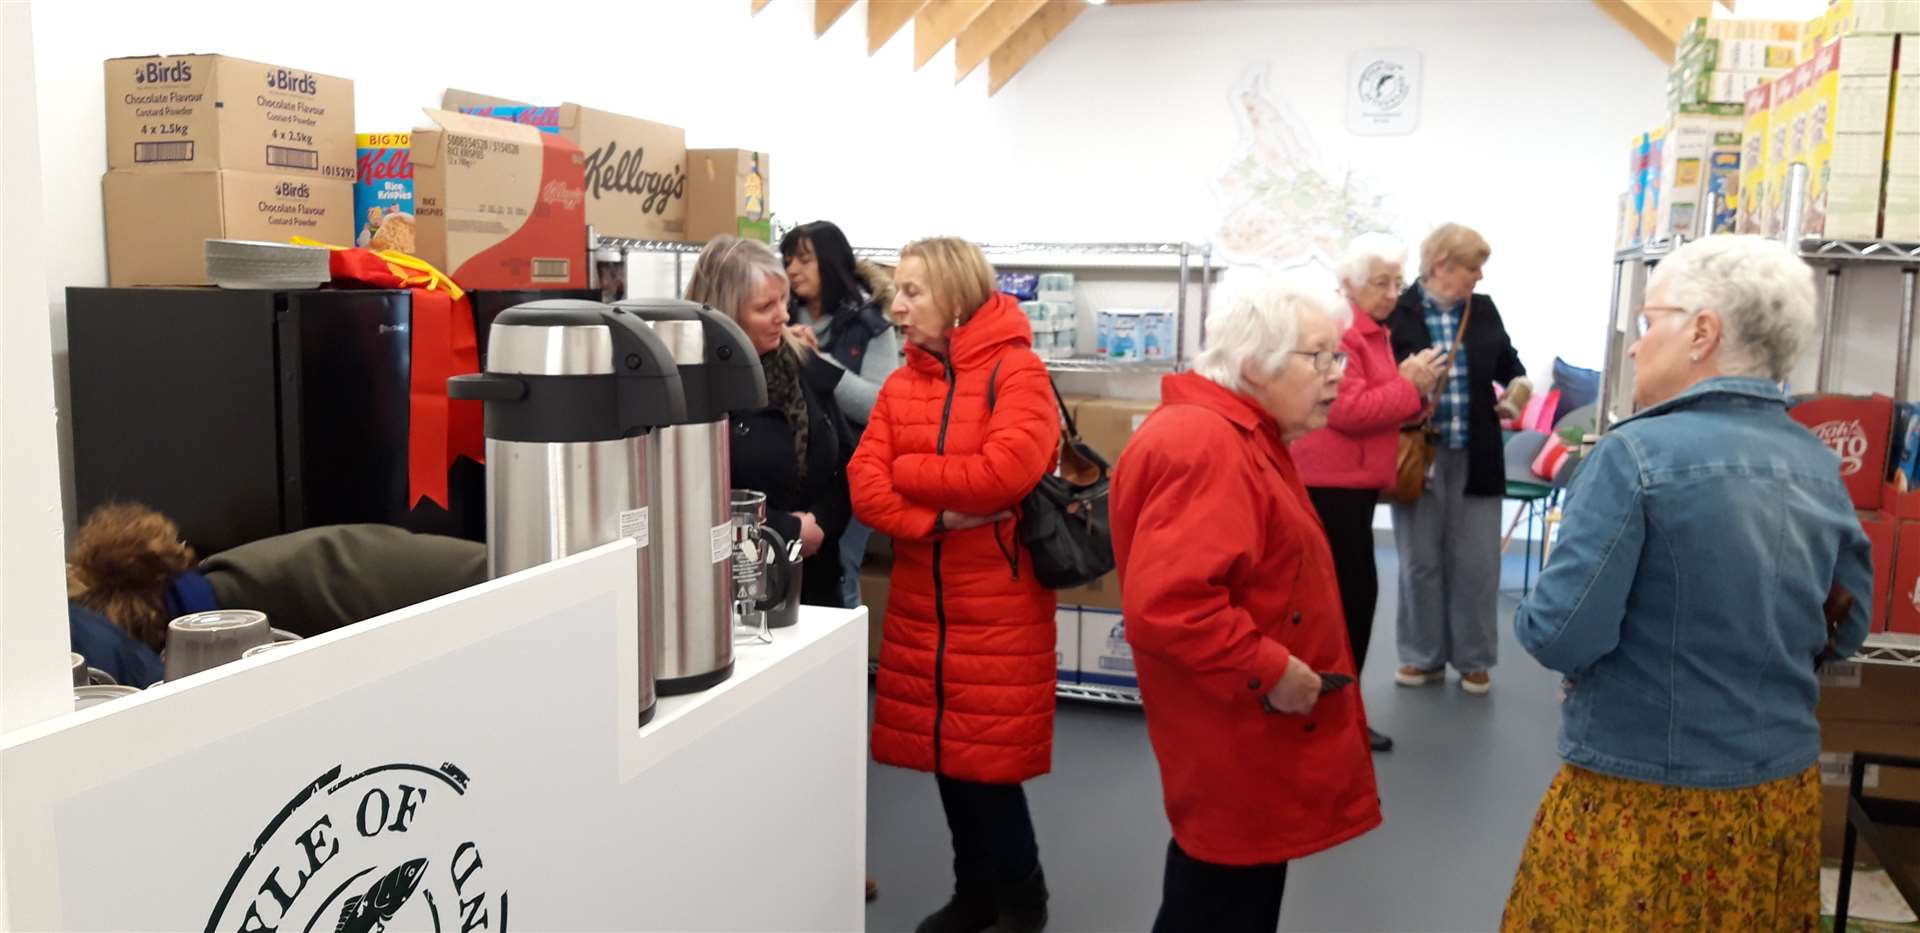 There is plenty of room in the new food larder to enjoy tea, coffee and a chat.